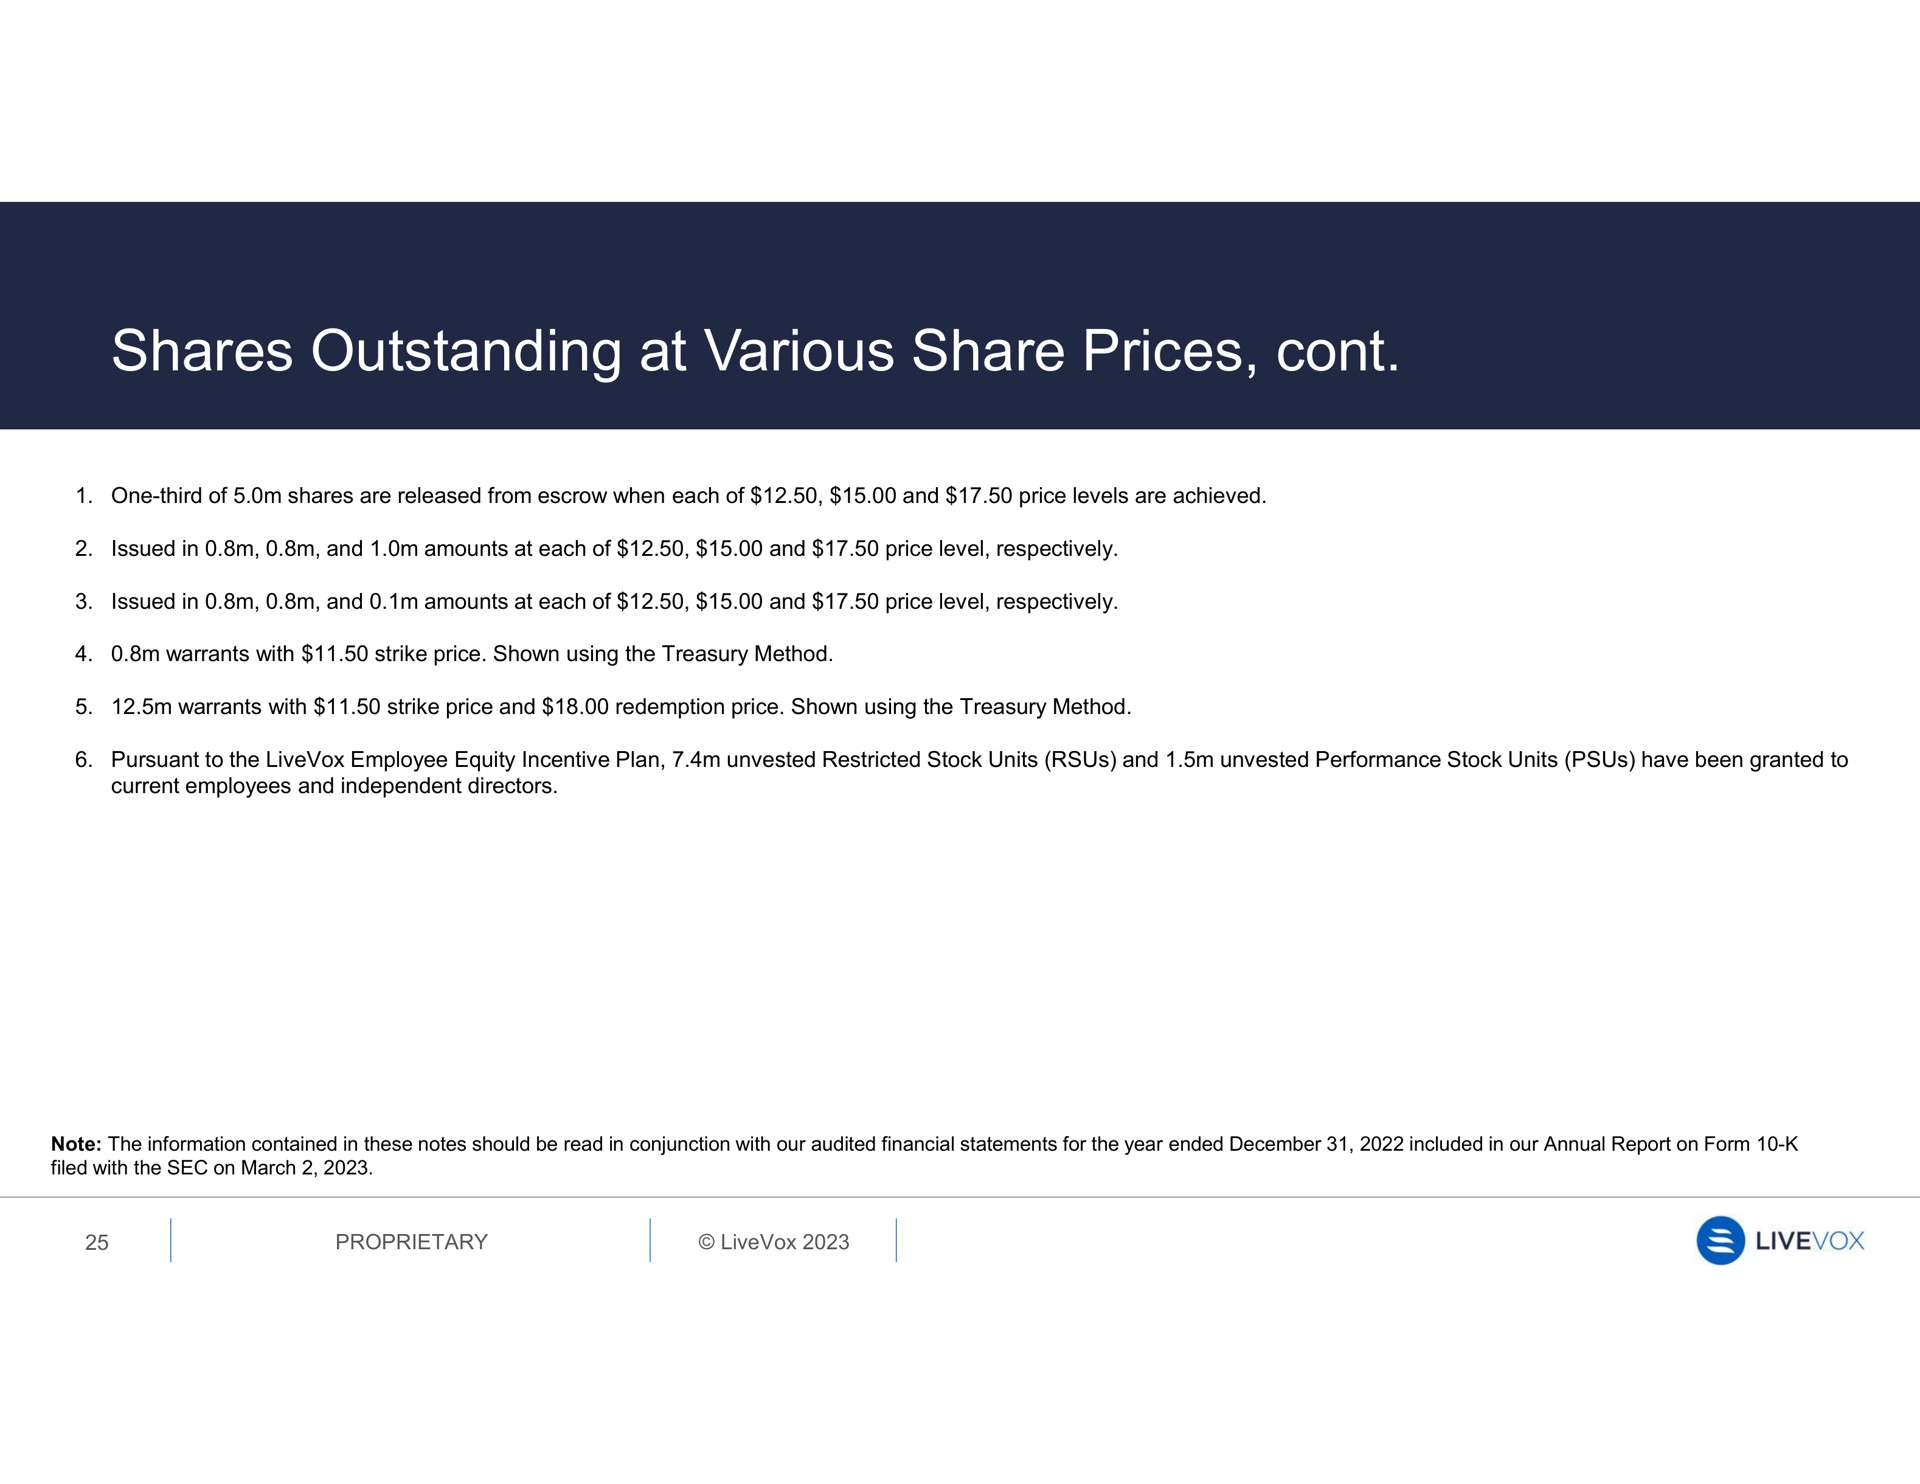 shares outstanding at various share prices | LiveVox